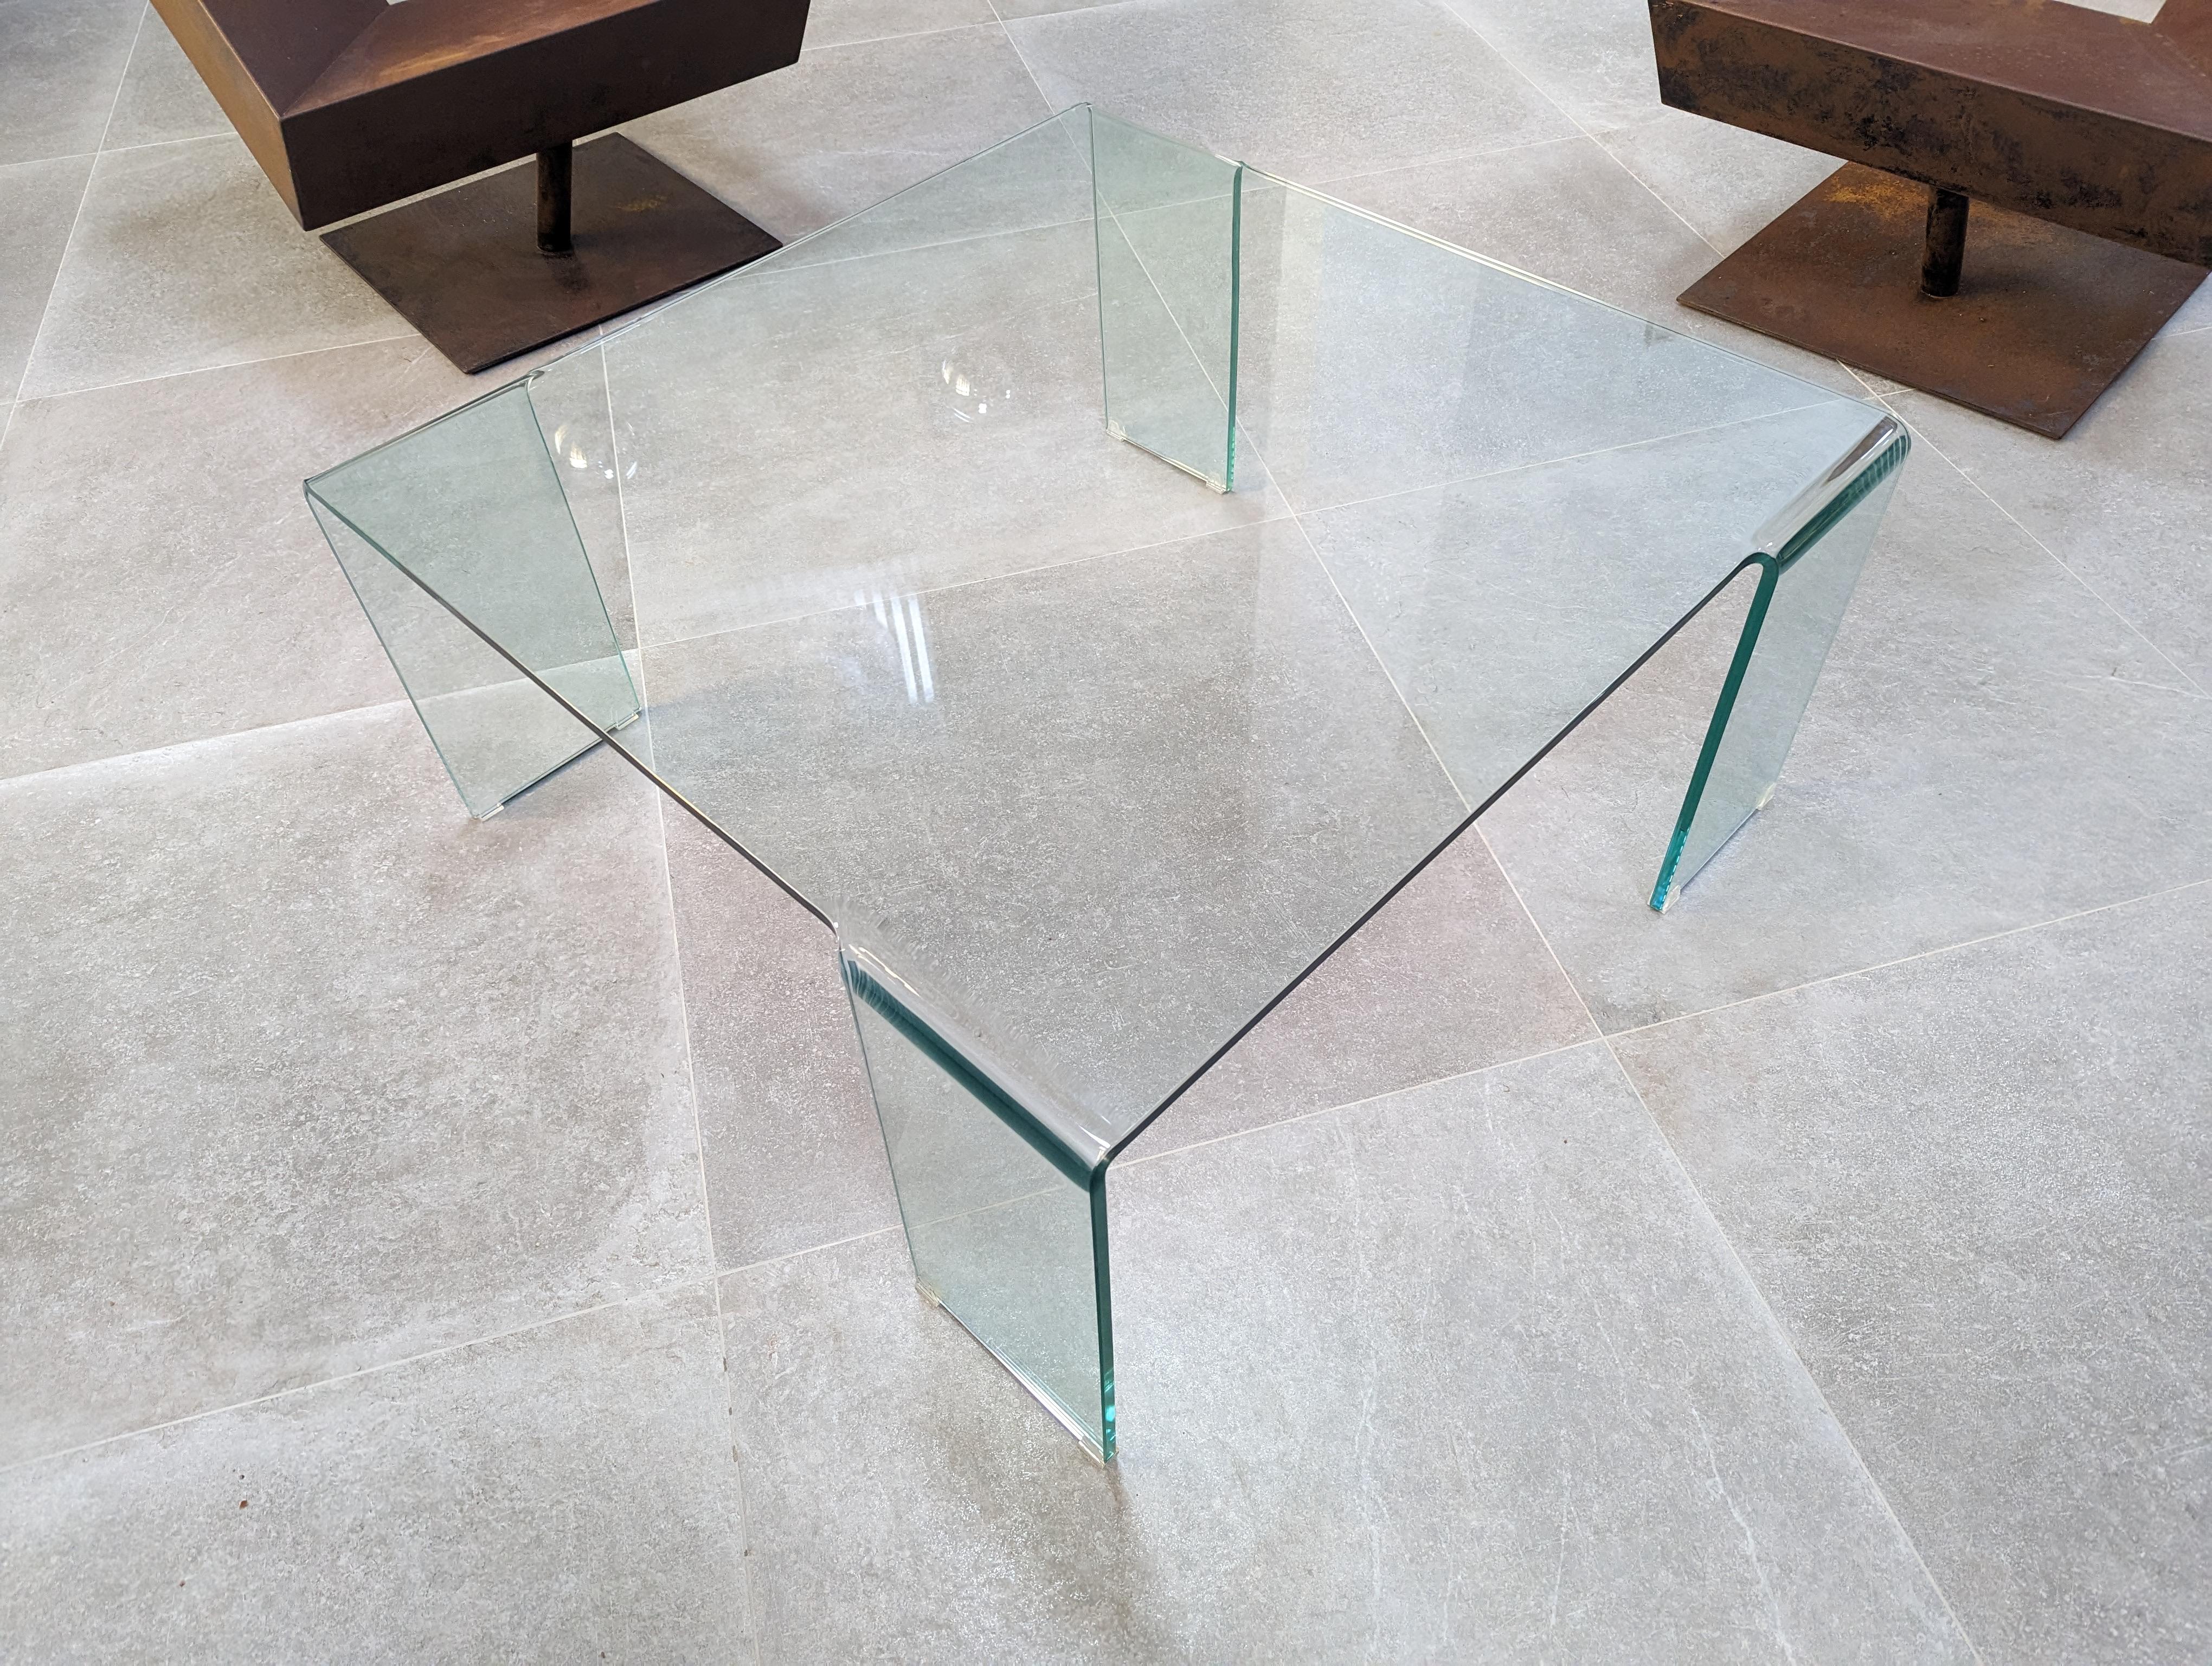 Elegant table made of curved glass following the famous design of the Neutra table created by Rodolfo Dordoni for Fiam. A timeless table that fits into all styles and rooms, providing space and visual light to the entire environment.